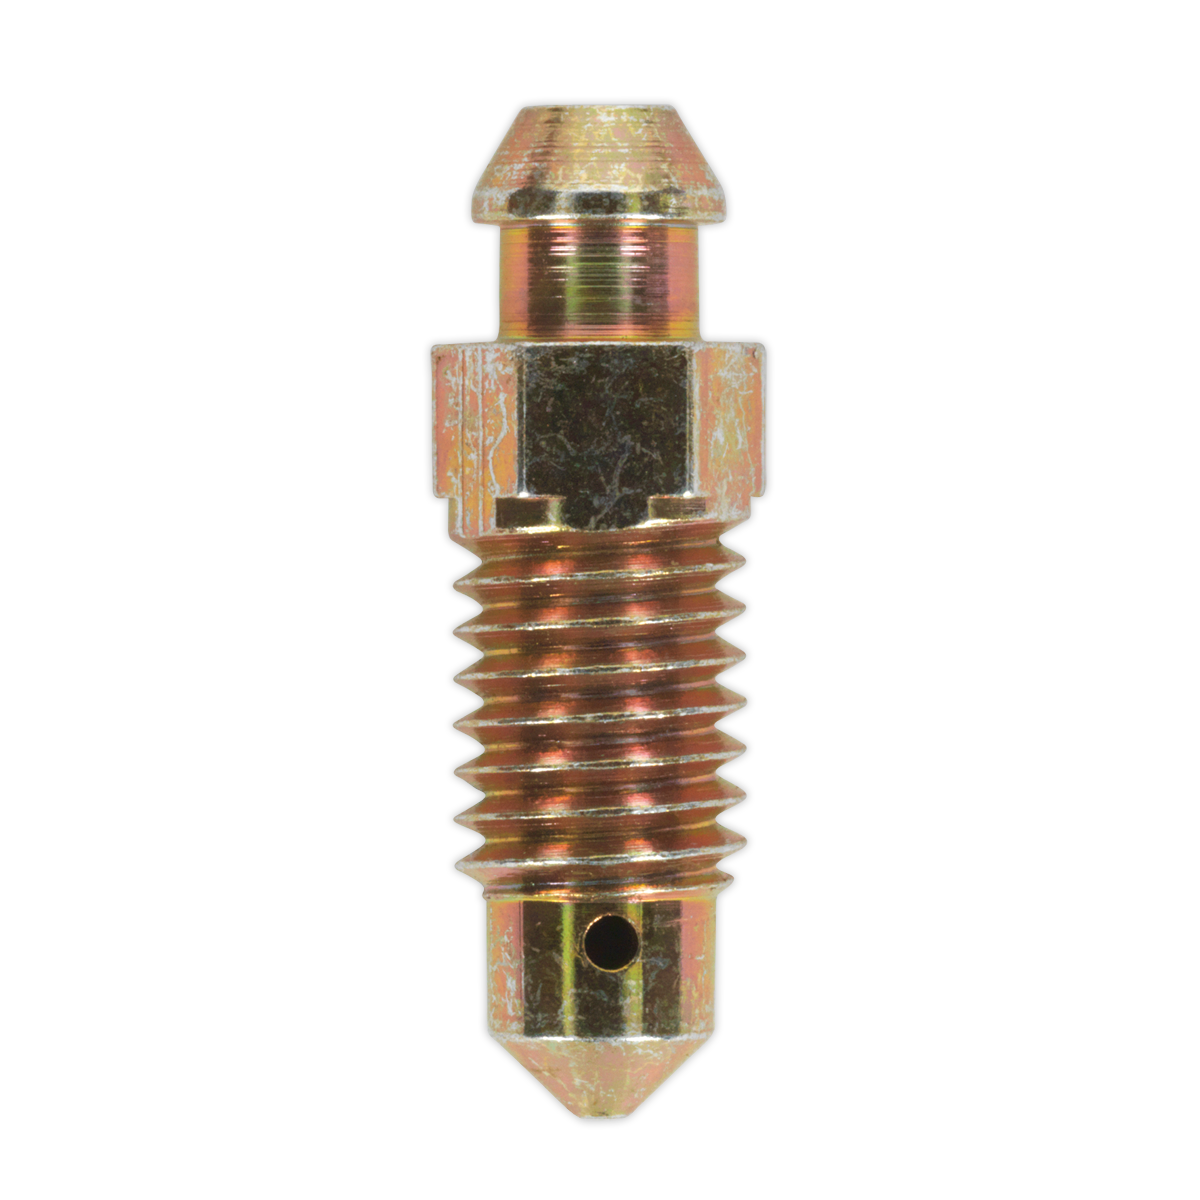 Sealey Brake Bleed Screw M8 x 24mm 1.25mm Pitch Pack of 10